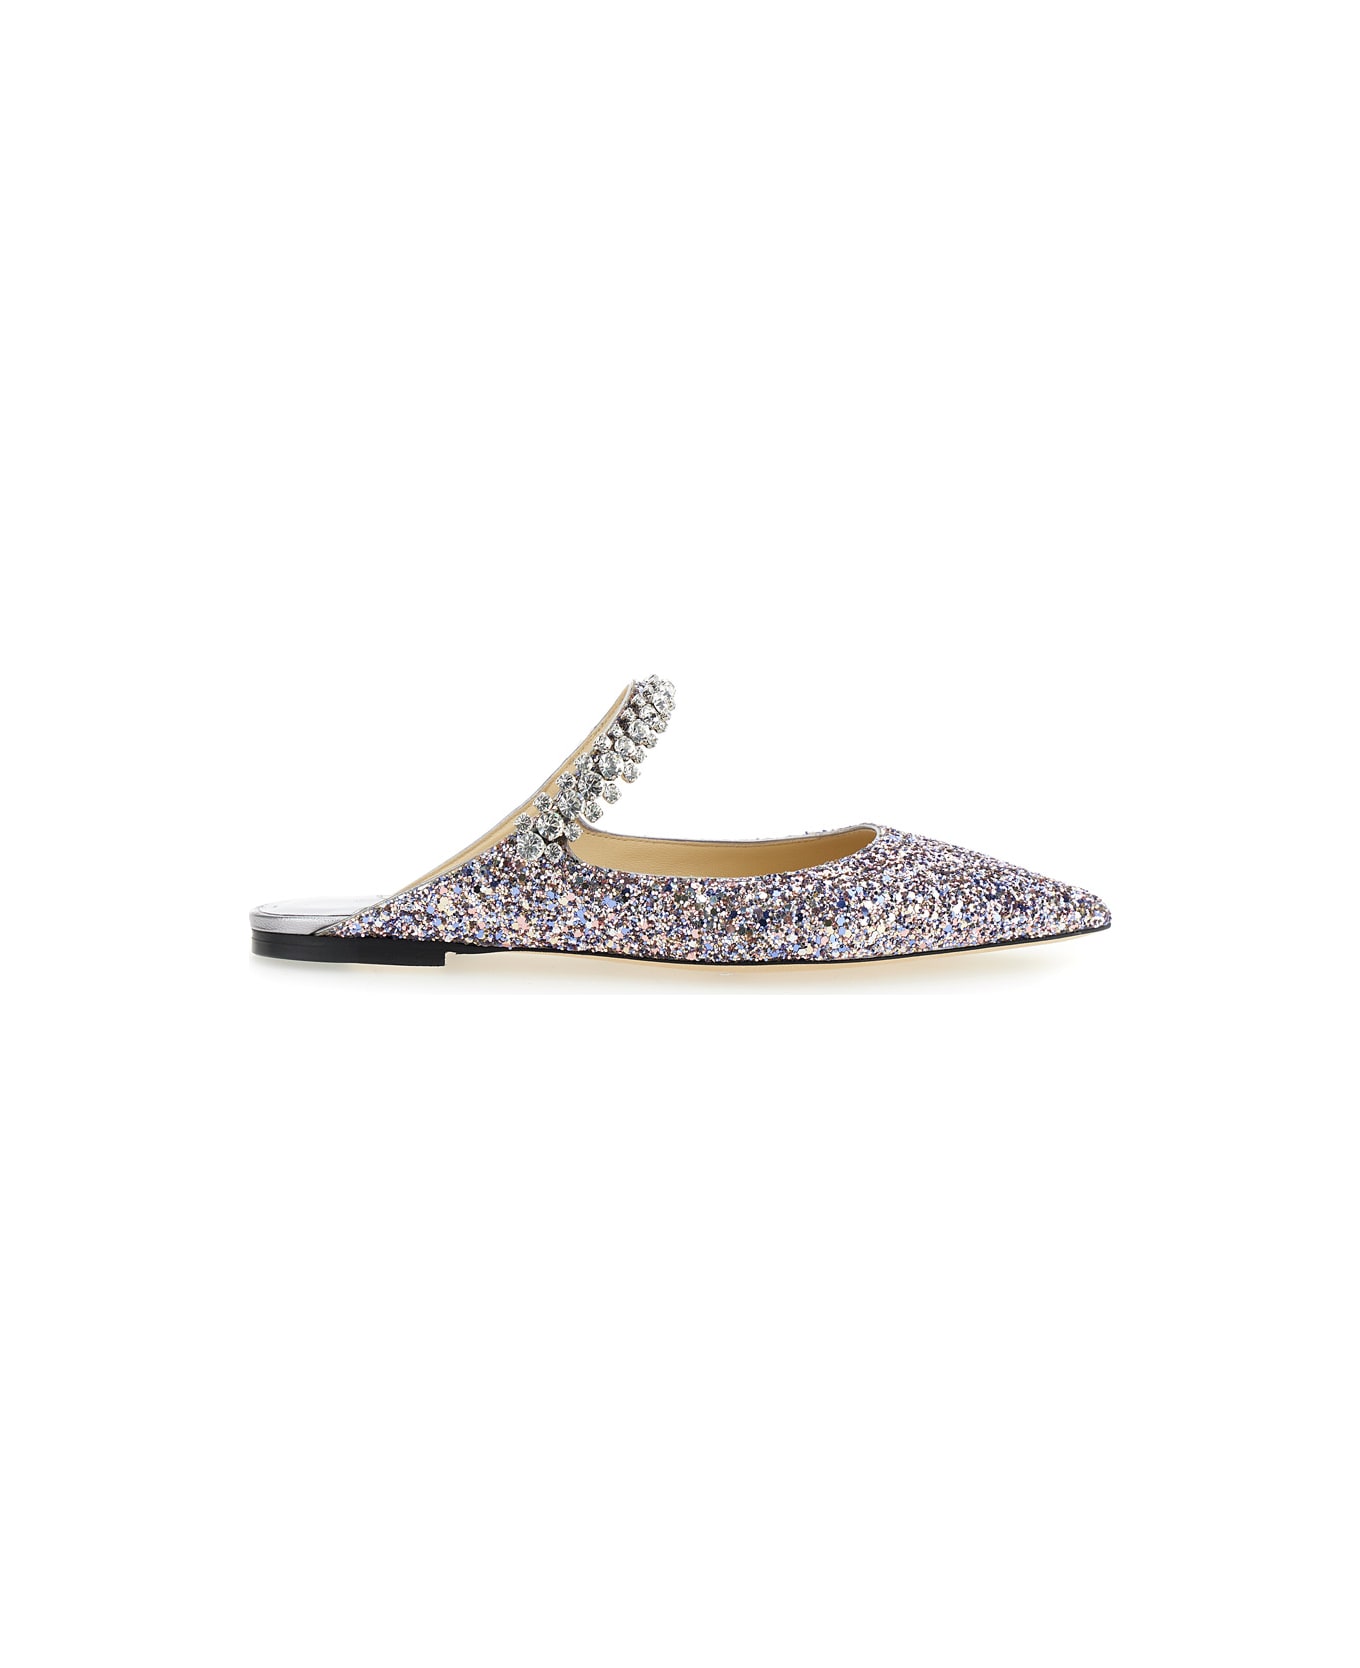 Jimmy Choo 'bling Flat' Multicolor Mules With Crystal Strap In Glitter Fabric Woman - Metallic